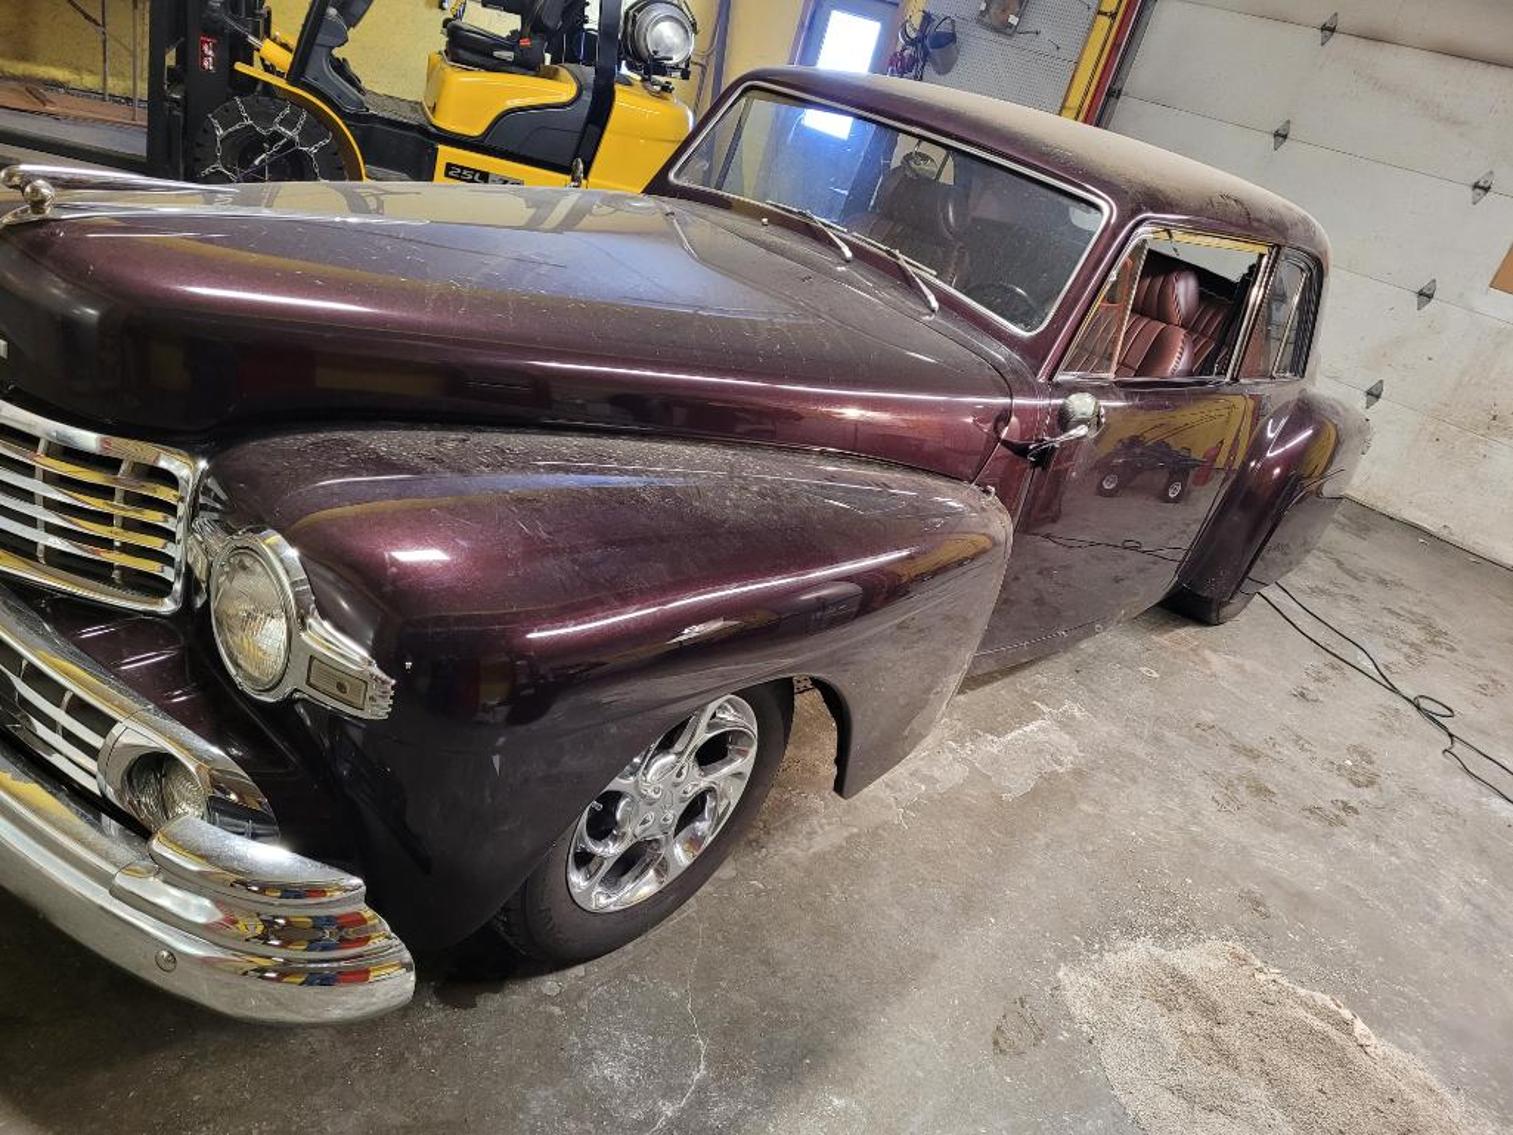 1948 Lincoln, 98 Ford Explorer, Coins, Firearms, Tools and More